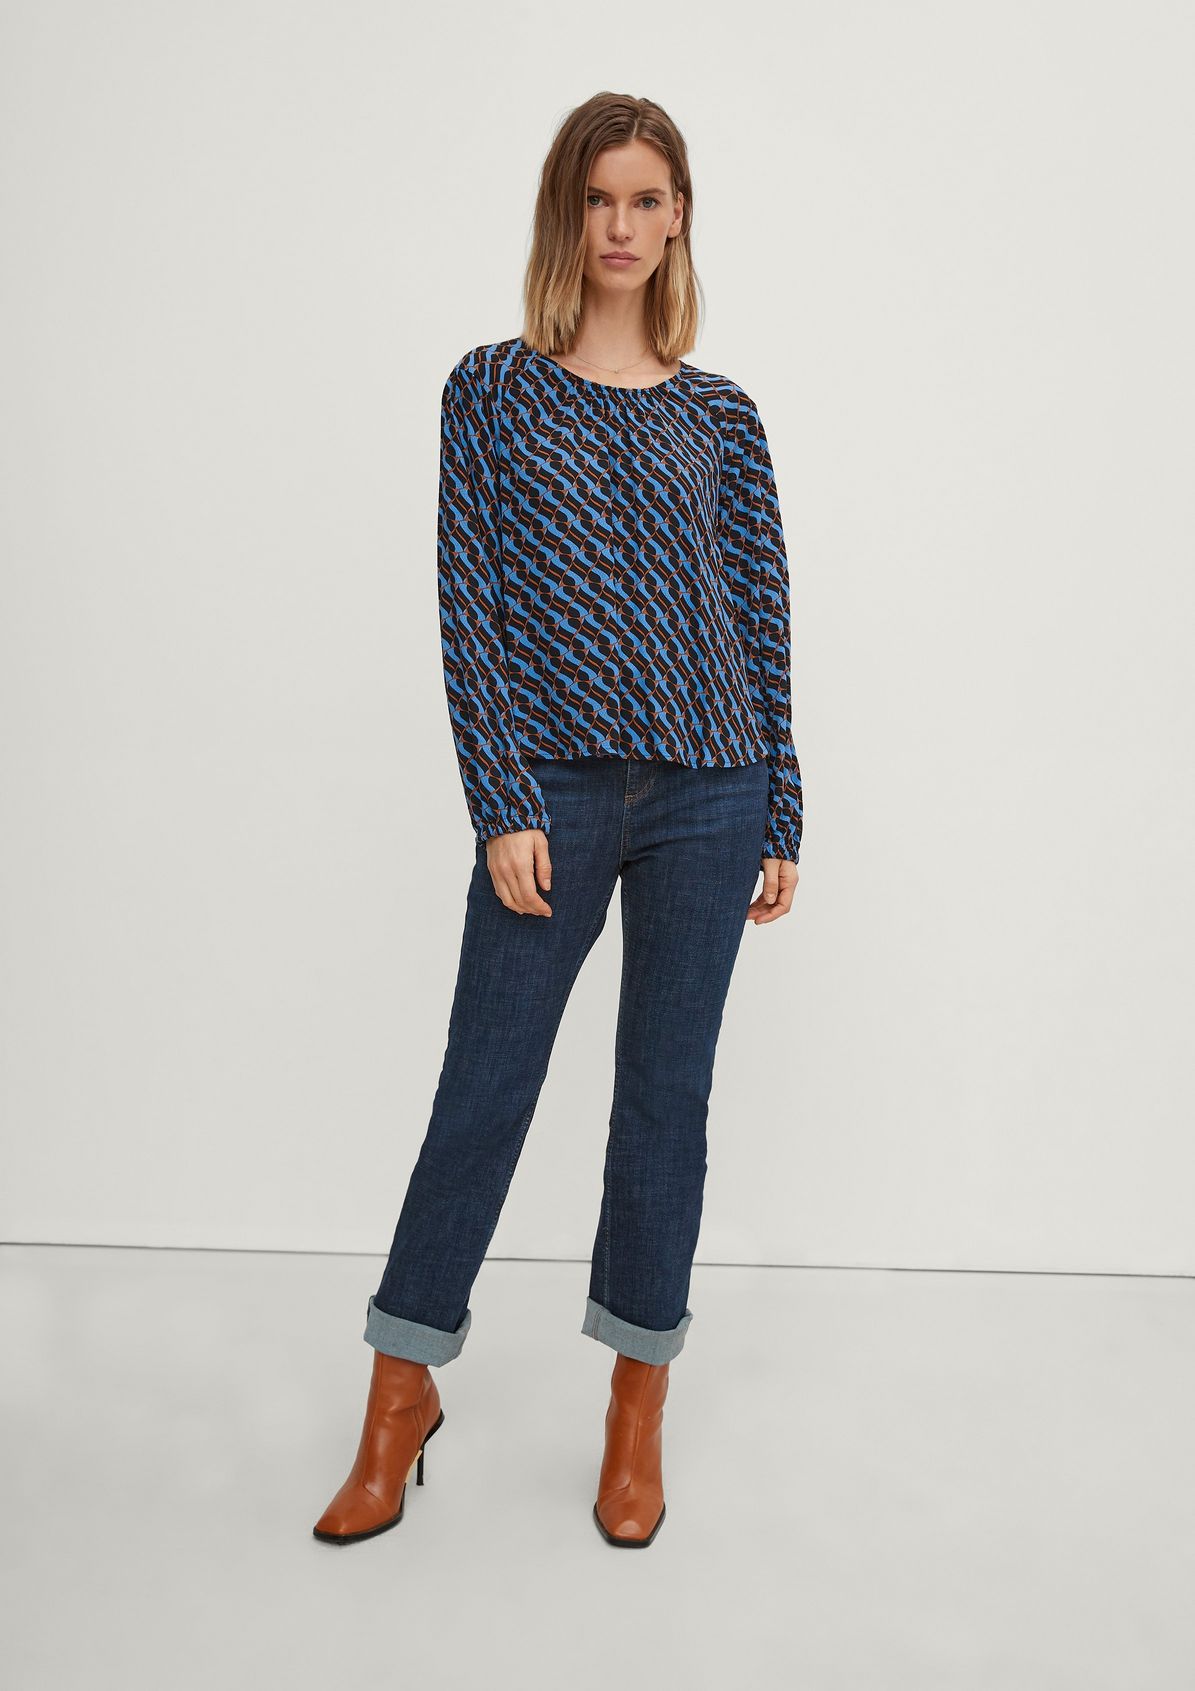 Breezy, textured blouse from comma